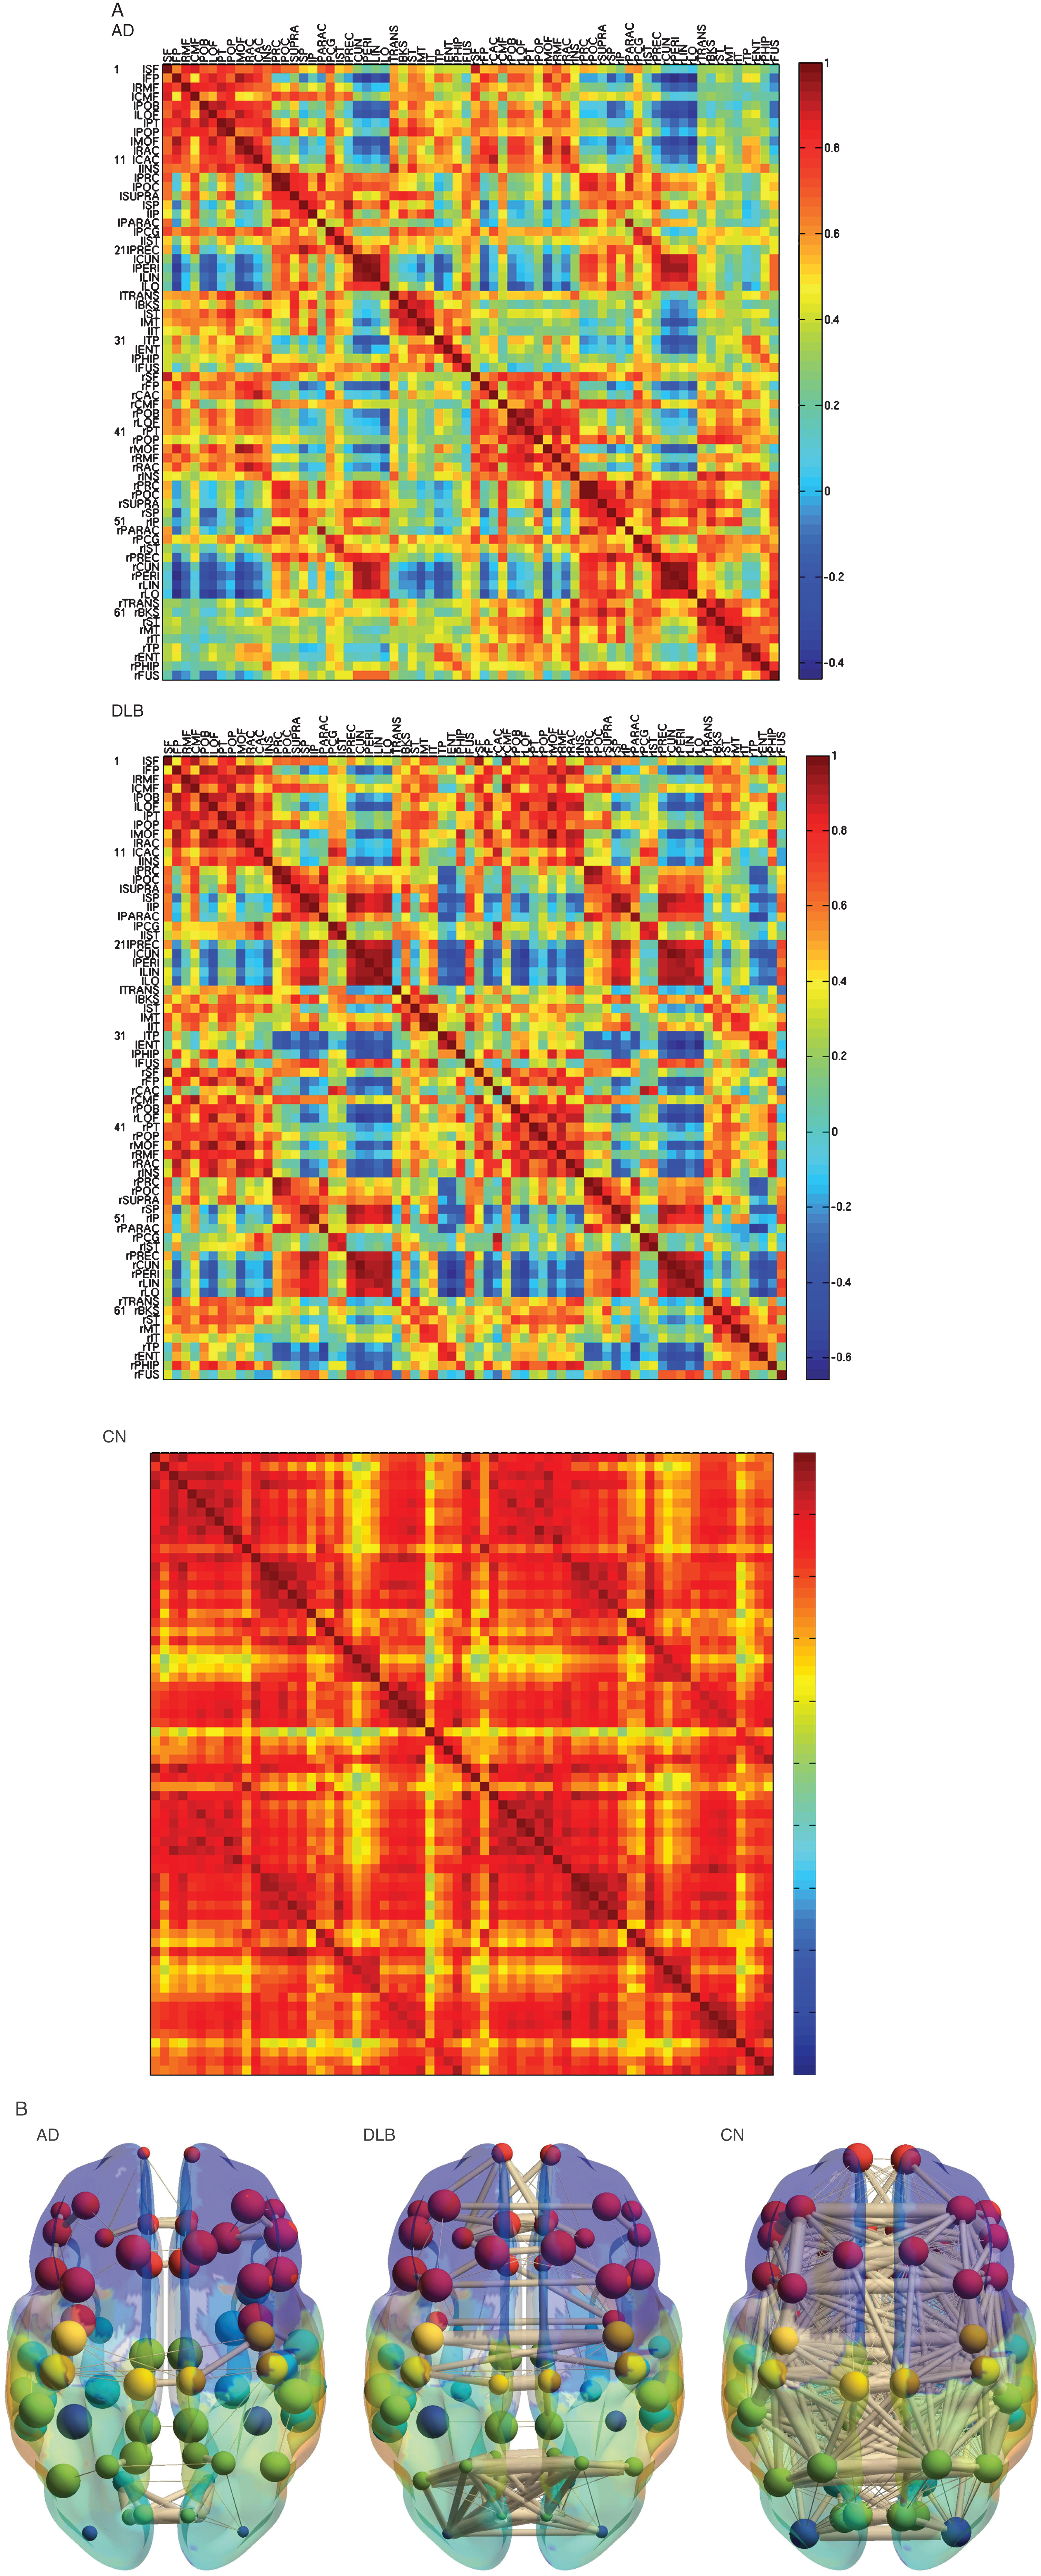 Metabolic connectivity matrix and anatomical localizations. A) Metabolic connectivity matrix. The cell color in the correlation matrix indicates the magnitude of the correlation, and the color is arranged in gradation from red to blue in accordance with the magnitude of correlation from positive to negative. Note that the lower limit of the correlation range is different in each matrix (See a color navigation side bar). Some of the correlations decreased more severely in DLB than in AD. In addition, other correlations in DLB are relatively preserved. The texture of the matrix in DLB looks “patchy” compared with that in AD. AD, Alzheimer’s disease; DLB, dementia with Lewy bodies; CN, cognitive normal. B) The 3D schematic figures representing metabolic connectivity. The metabolic connections are overlaid on an anatomical atlas using nodes and edges. These figures are used to display an outline of the whole connectivity.